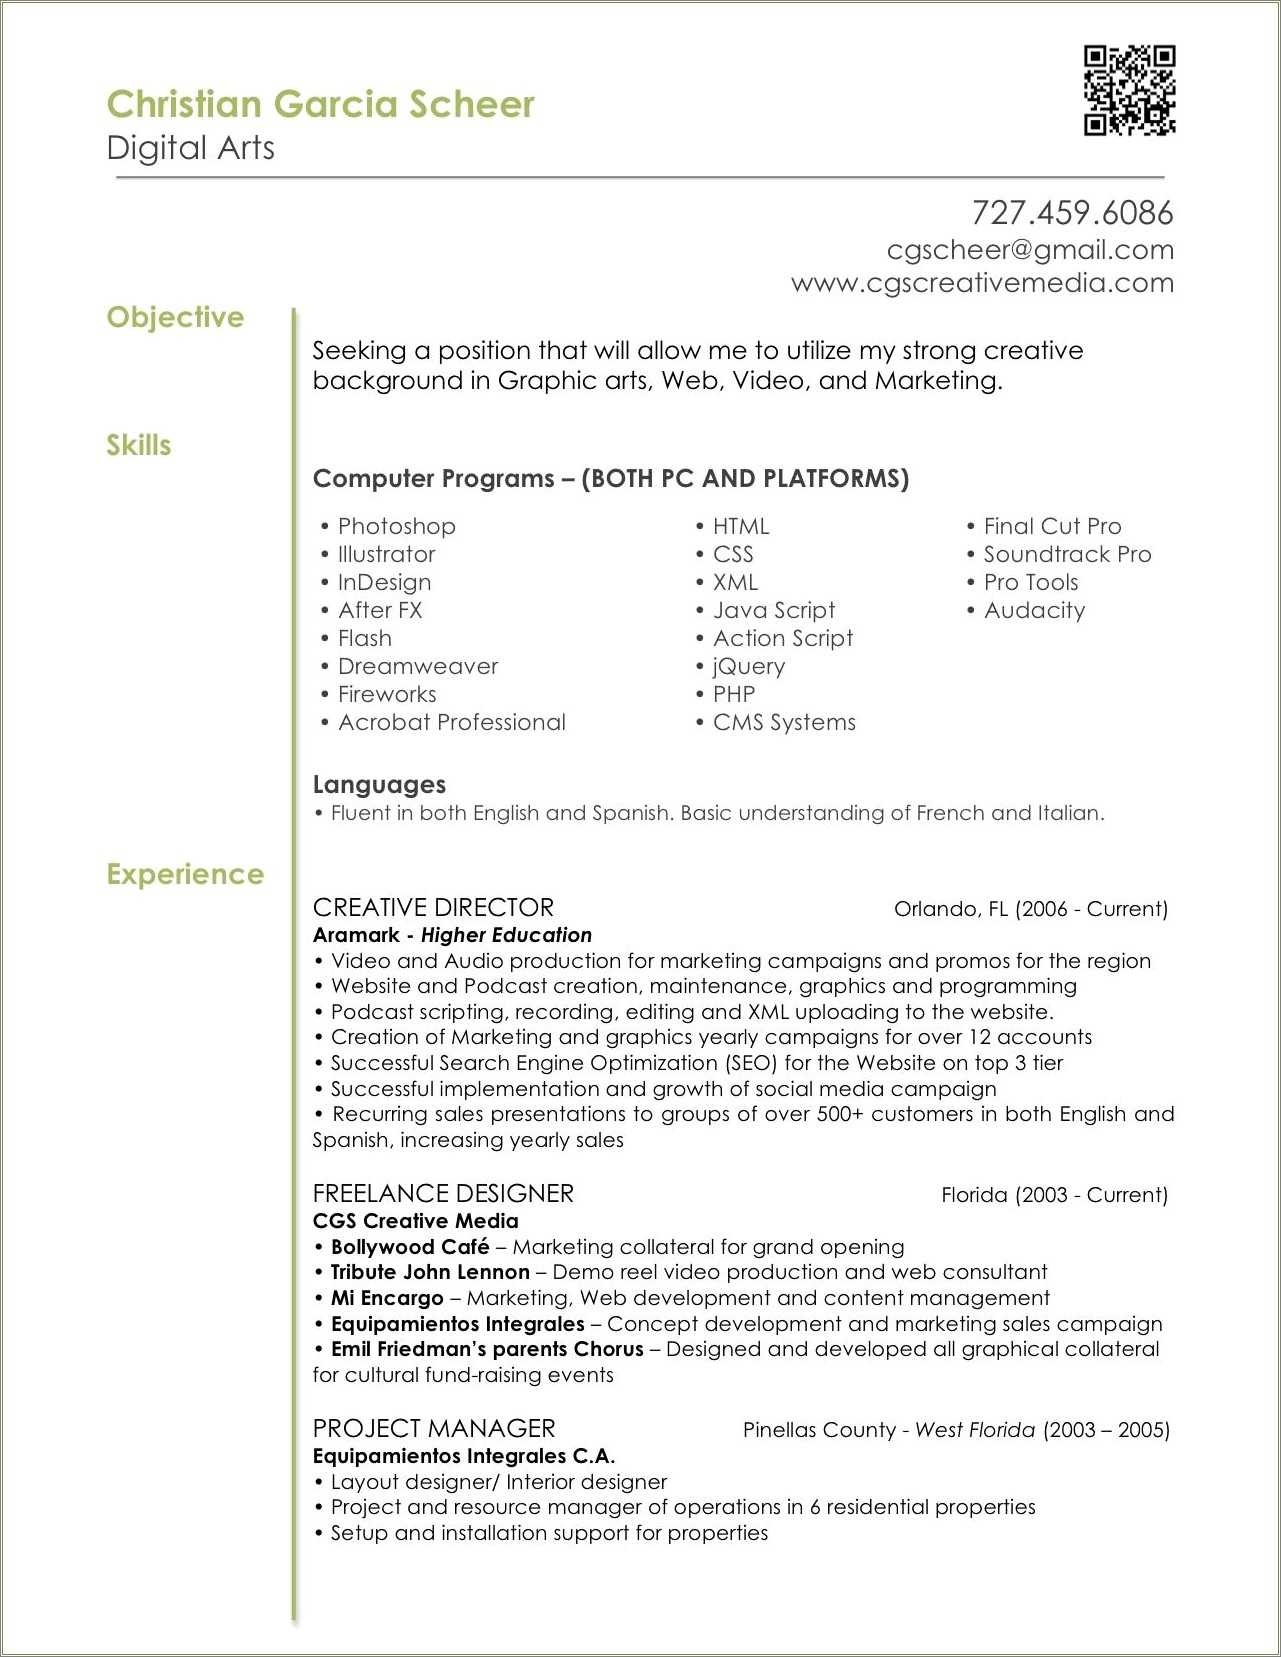 resume objective examples for designers